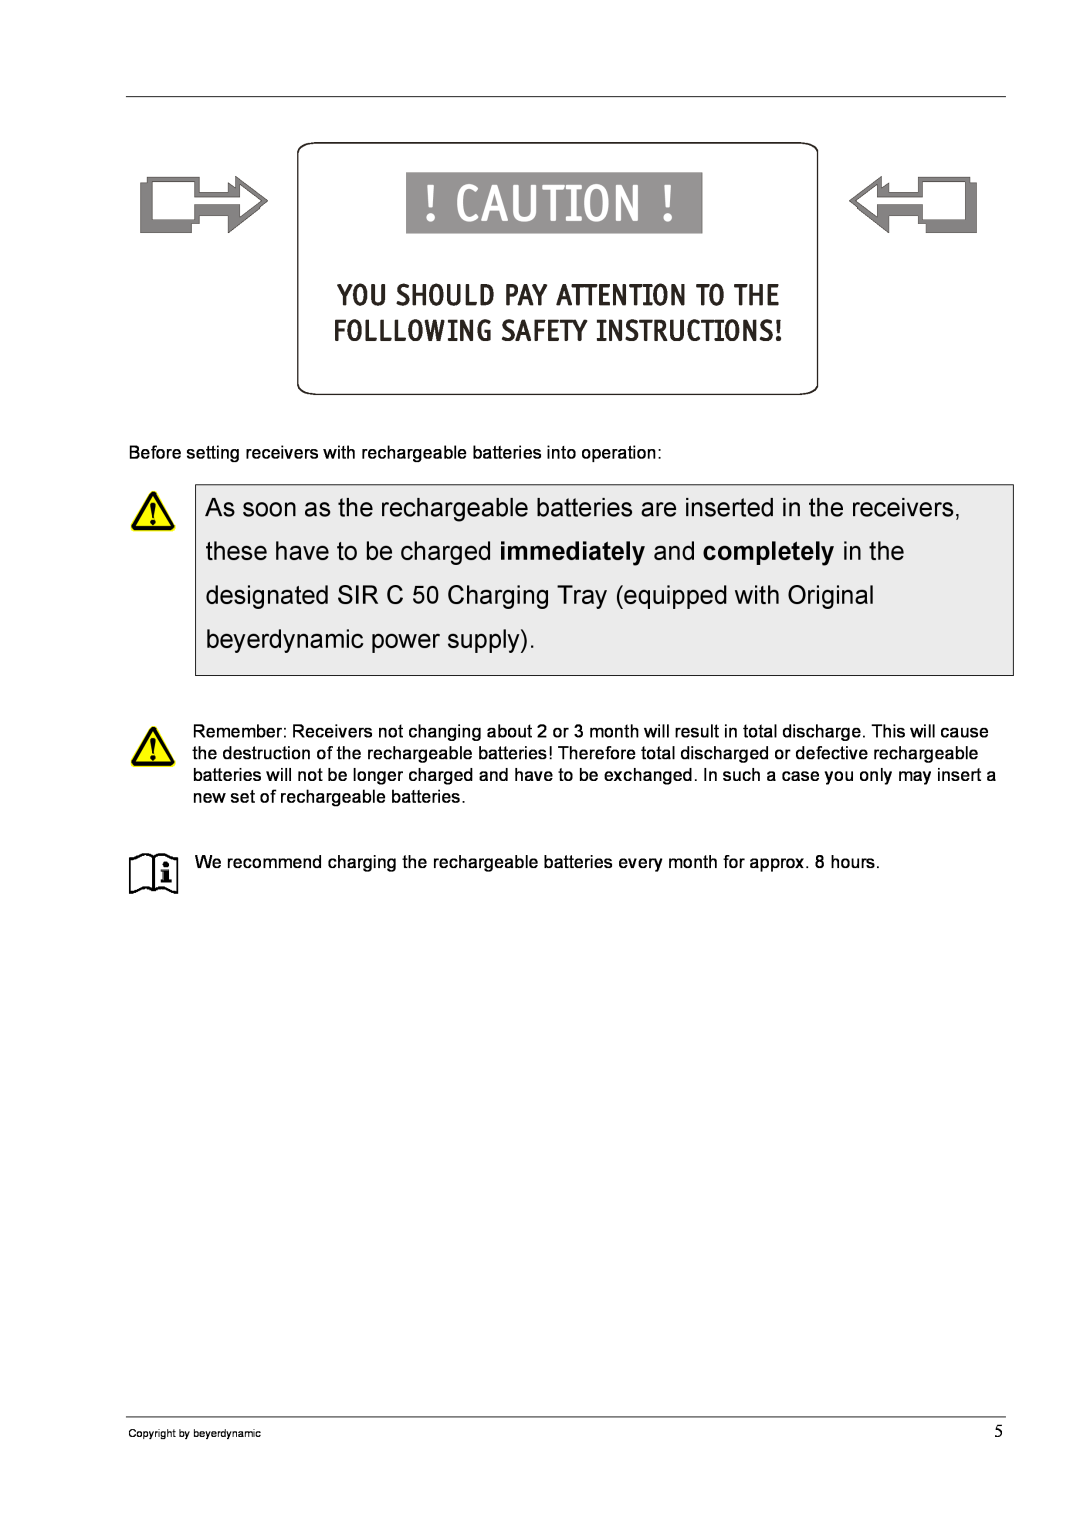 Beyerdynamic SIR 320 operating instructions You Should Pay Attention To The, Folllowing Safety Instructions 